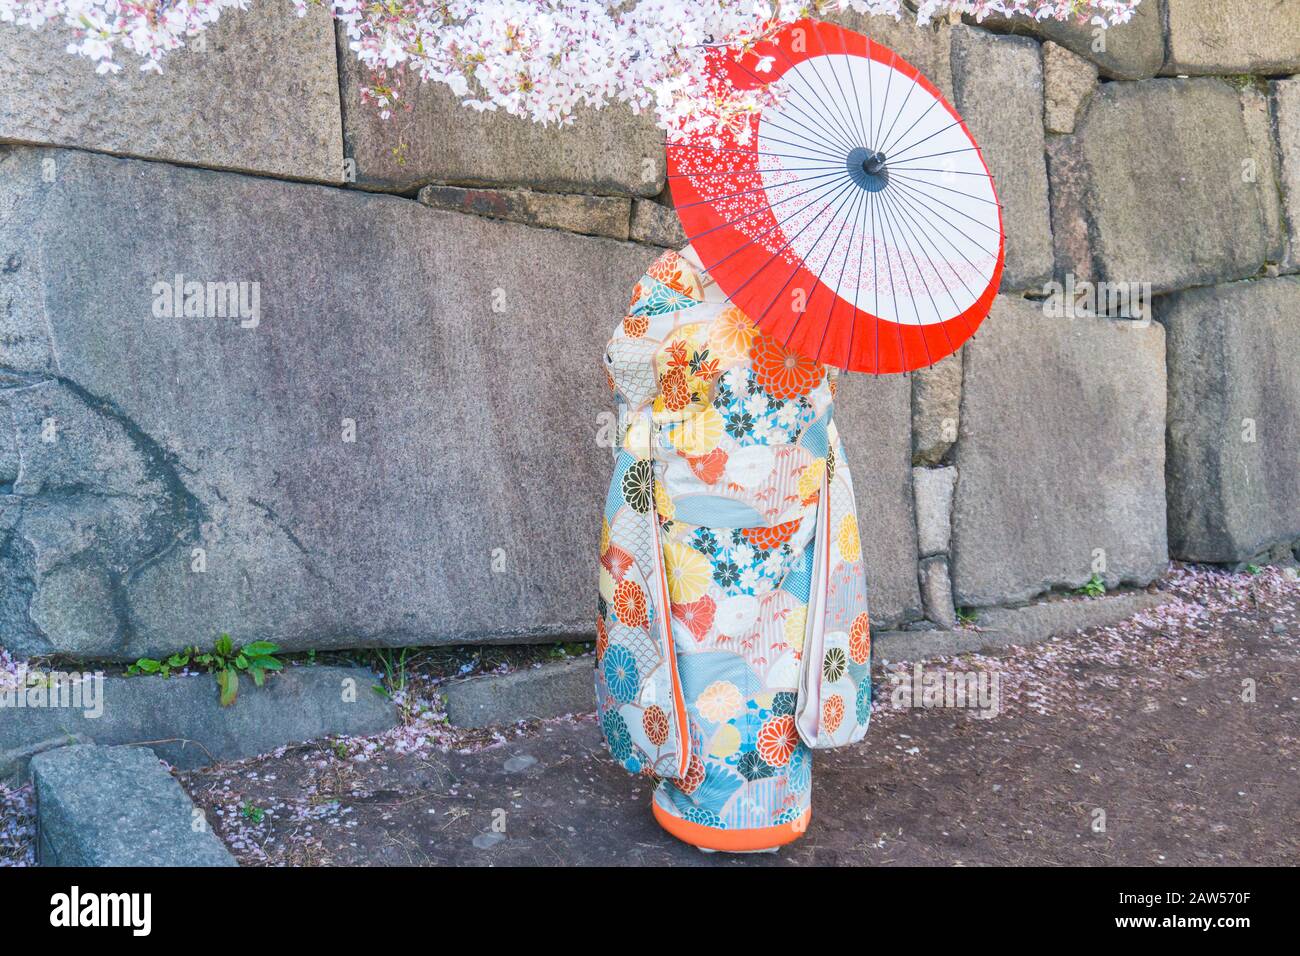 Geisha from the back. She is holding a red umbrella and wearing beautiful dress. she is next to the wall. Kimono with flowers is very colorful. Stock Photo